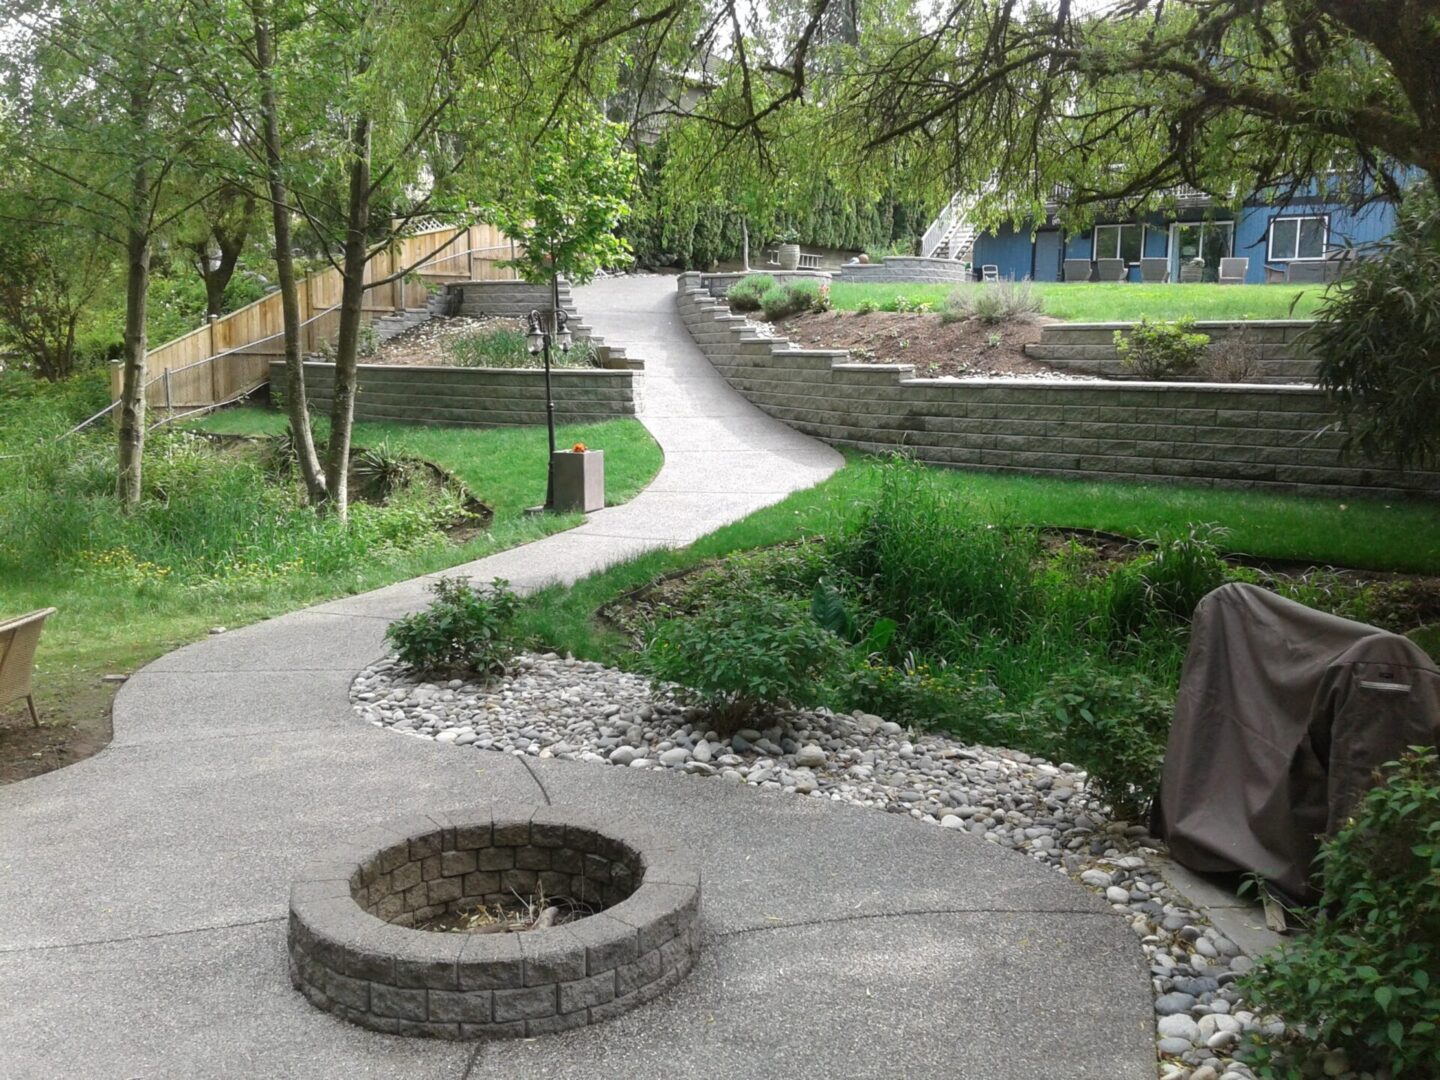 A winding pathway through a landscaped garden with stone walls, trees, and a covered grill area.